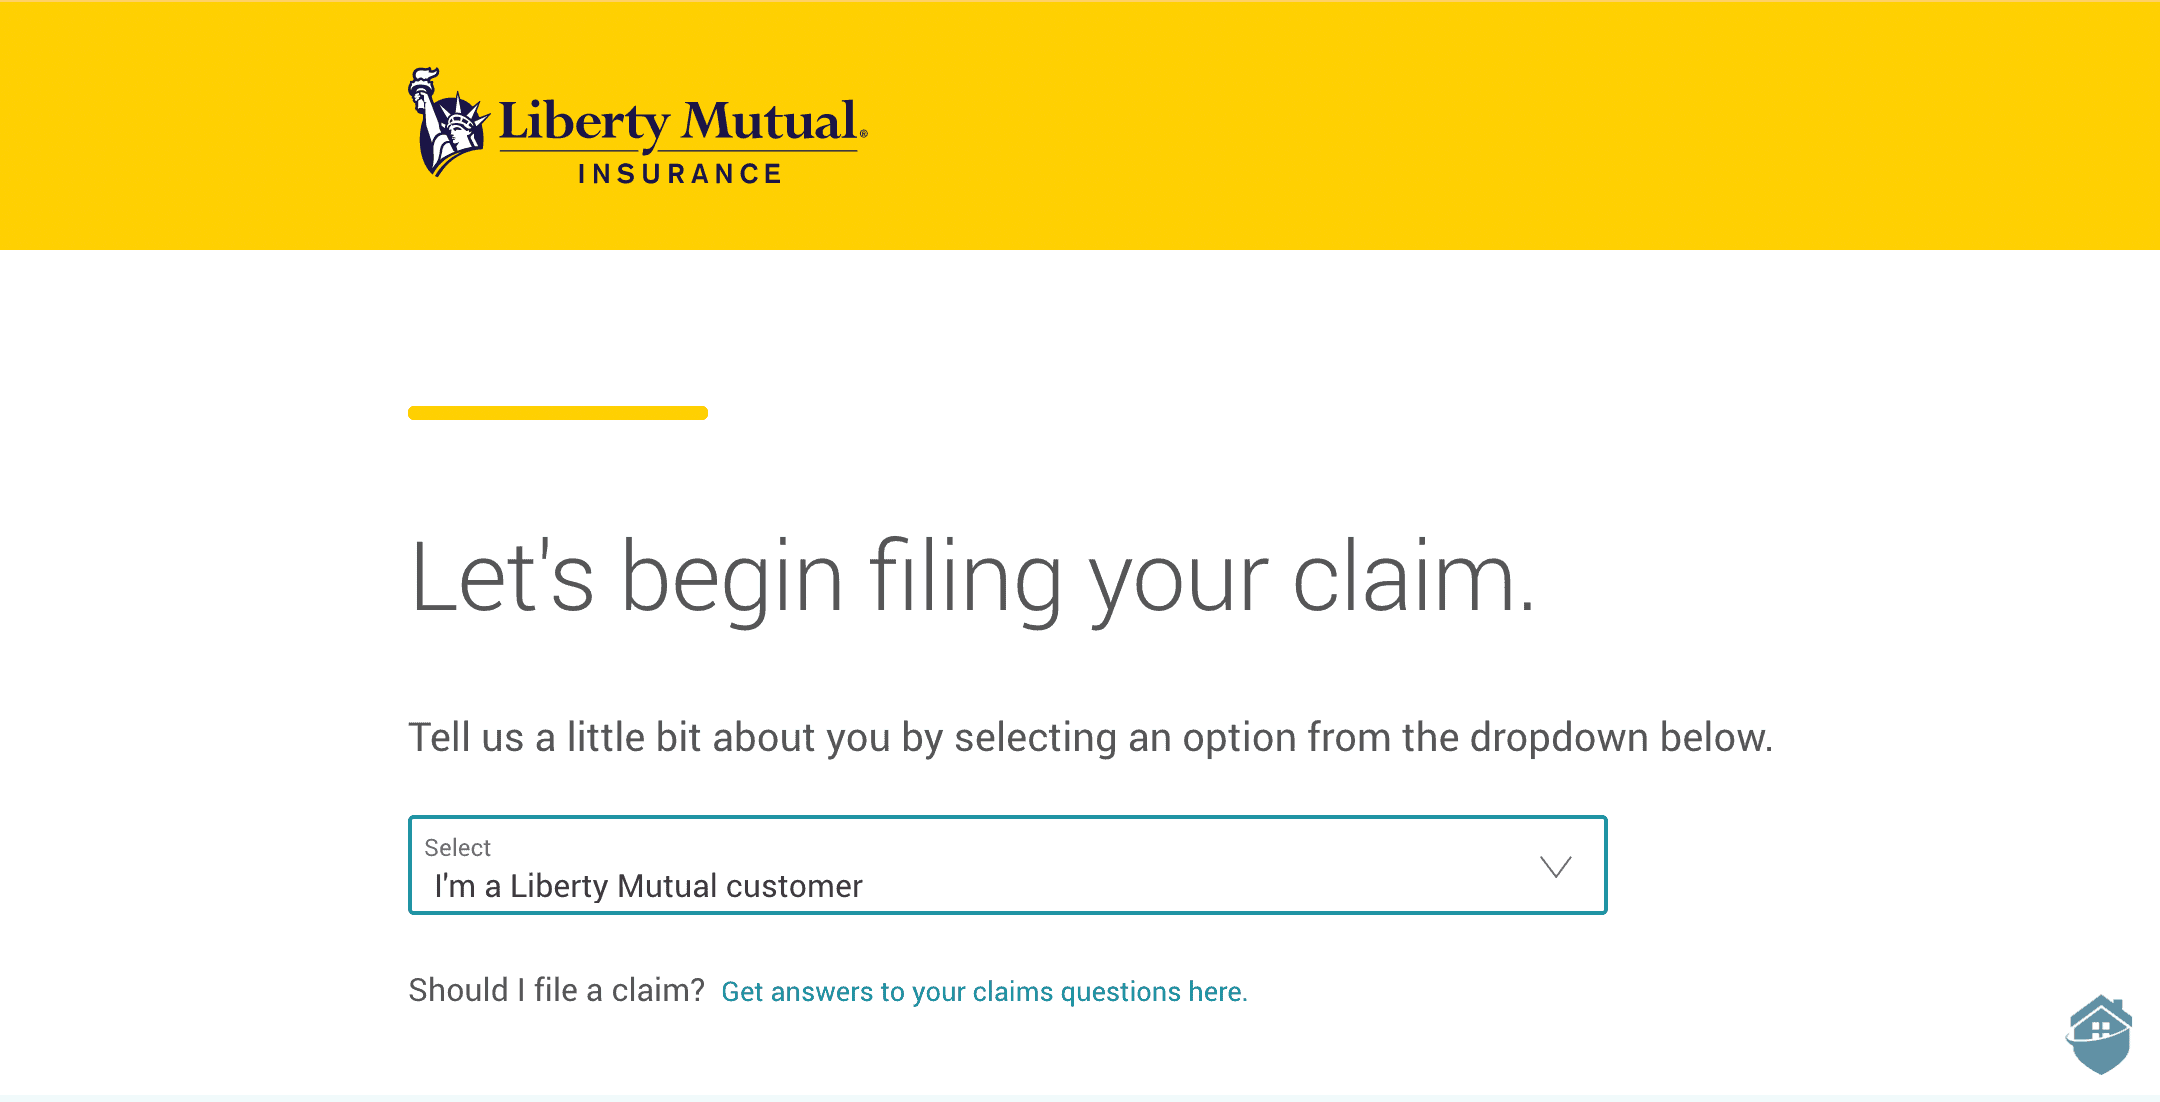 Liberty Mutual is upping their settlement game with faster online claims filing